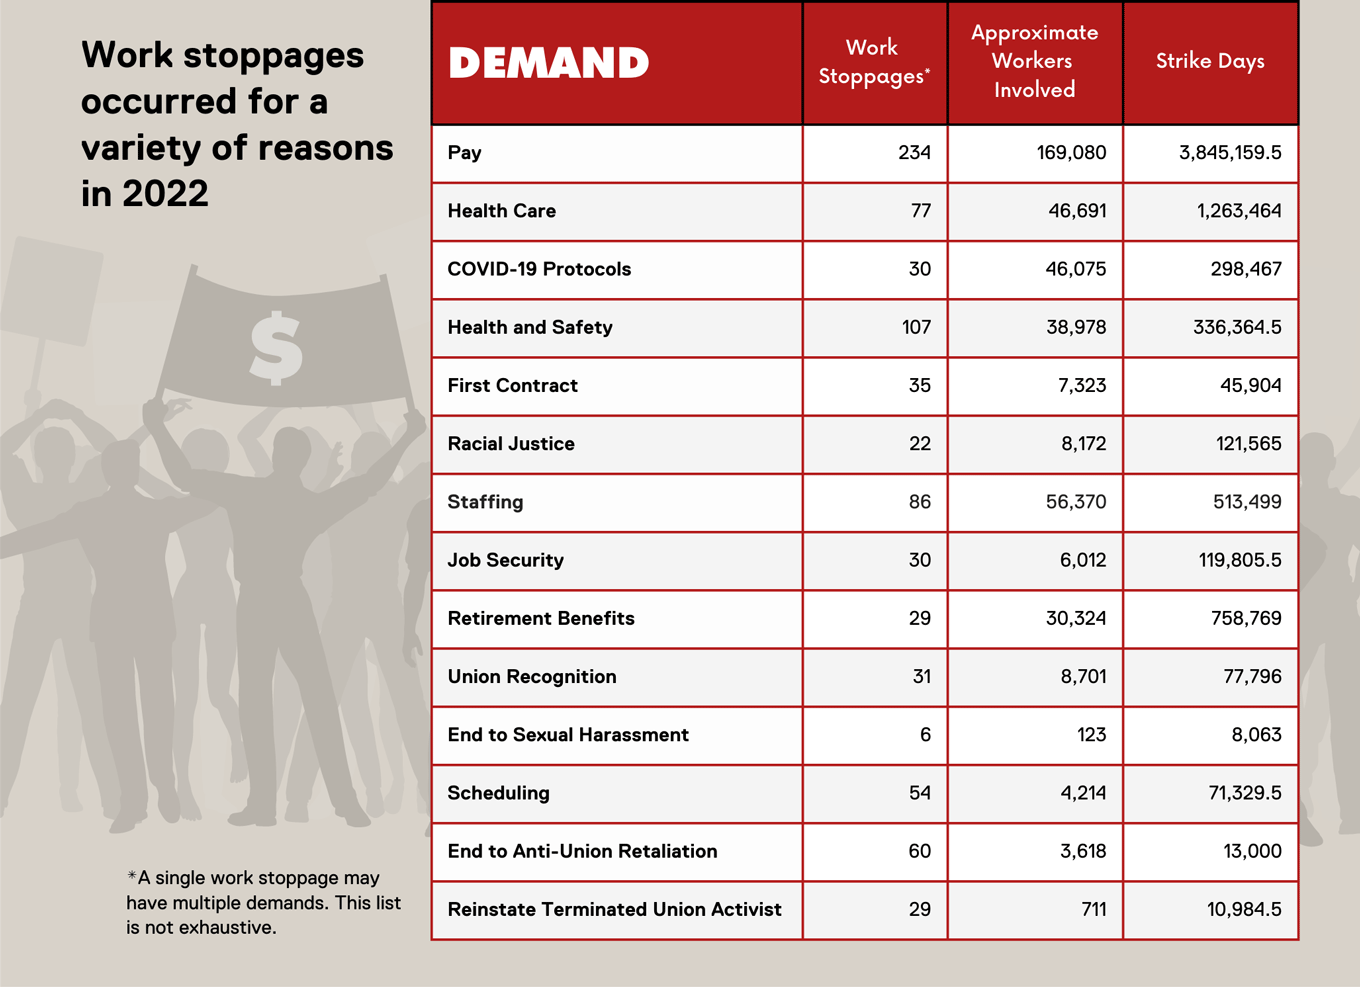 A table showing top demands by workers for work stoppages and strikes.